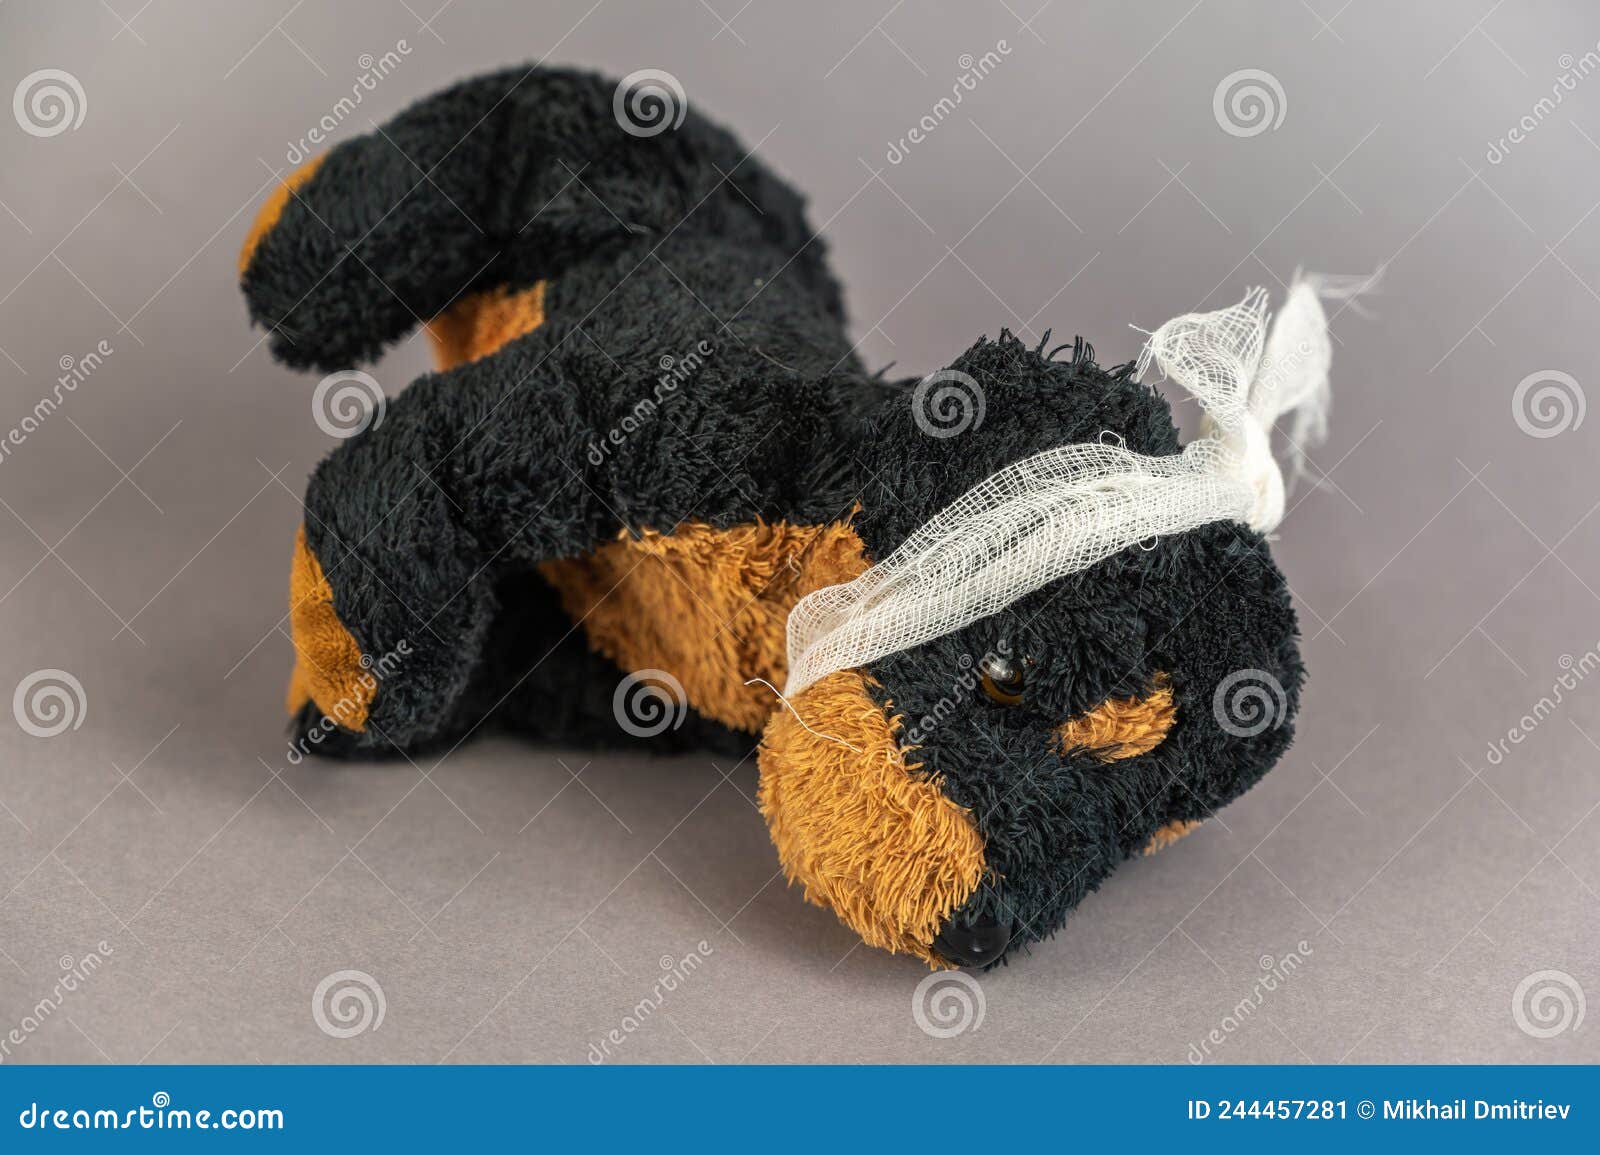 A Child`s Toy with a Bandaged Head Lies. Black Stuffed Dog on a Gray ...